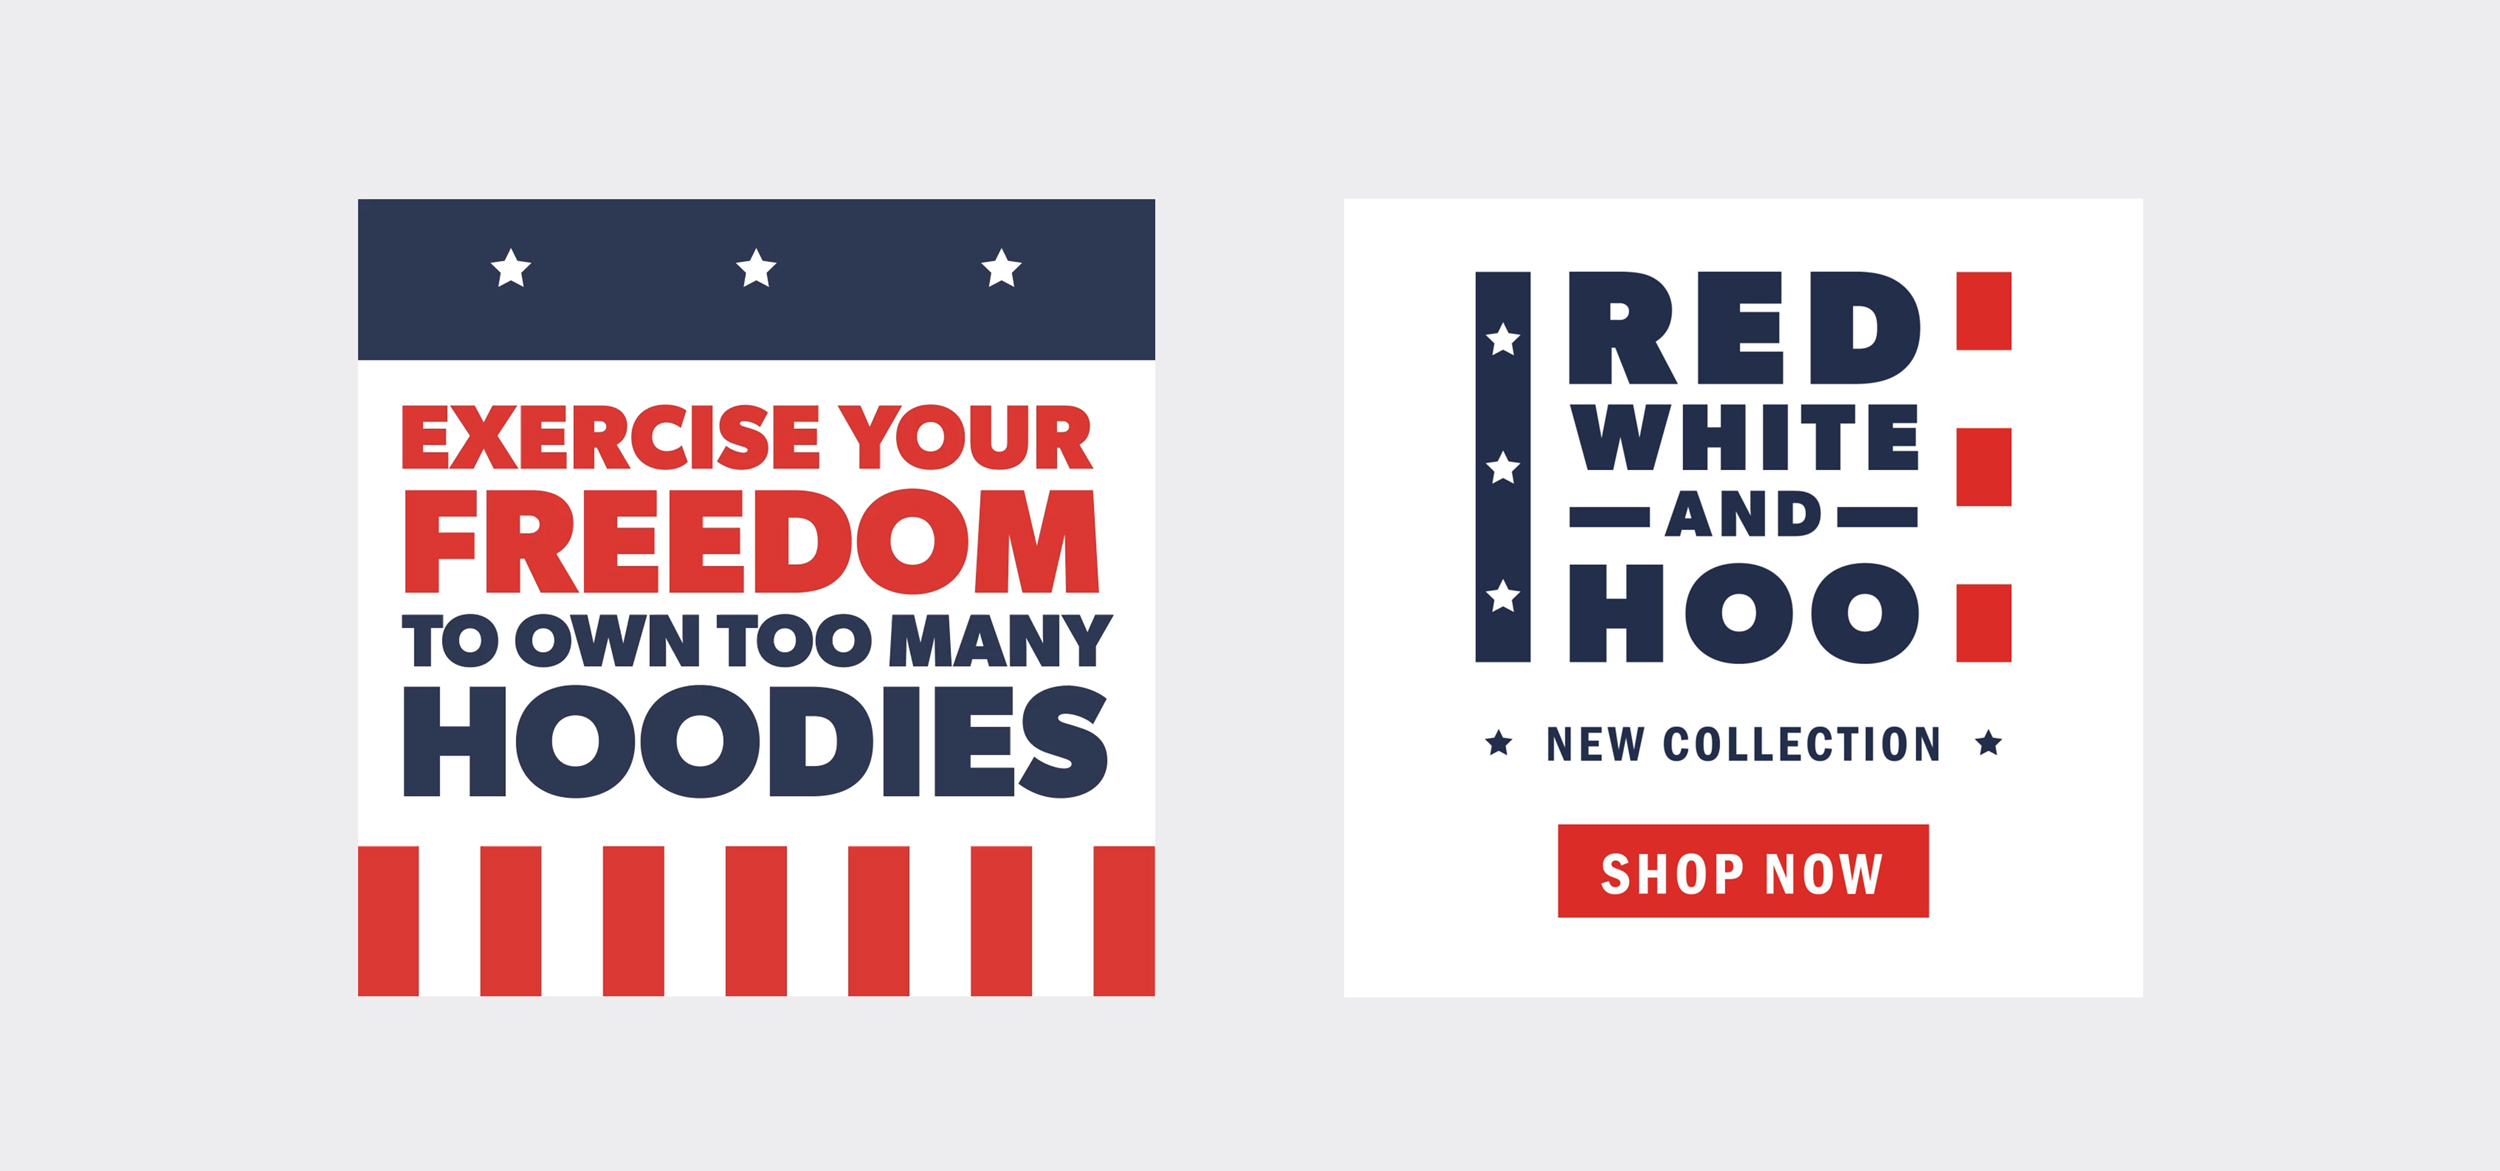 Red, White, and Hoo ads